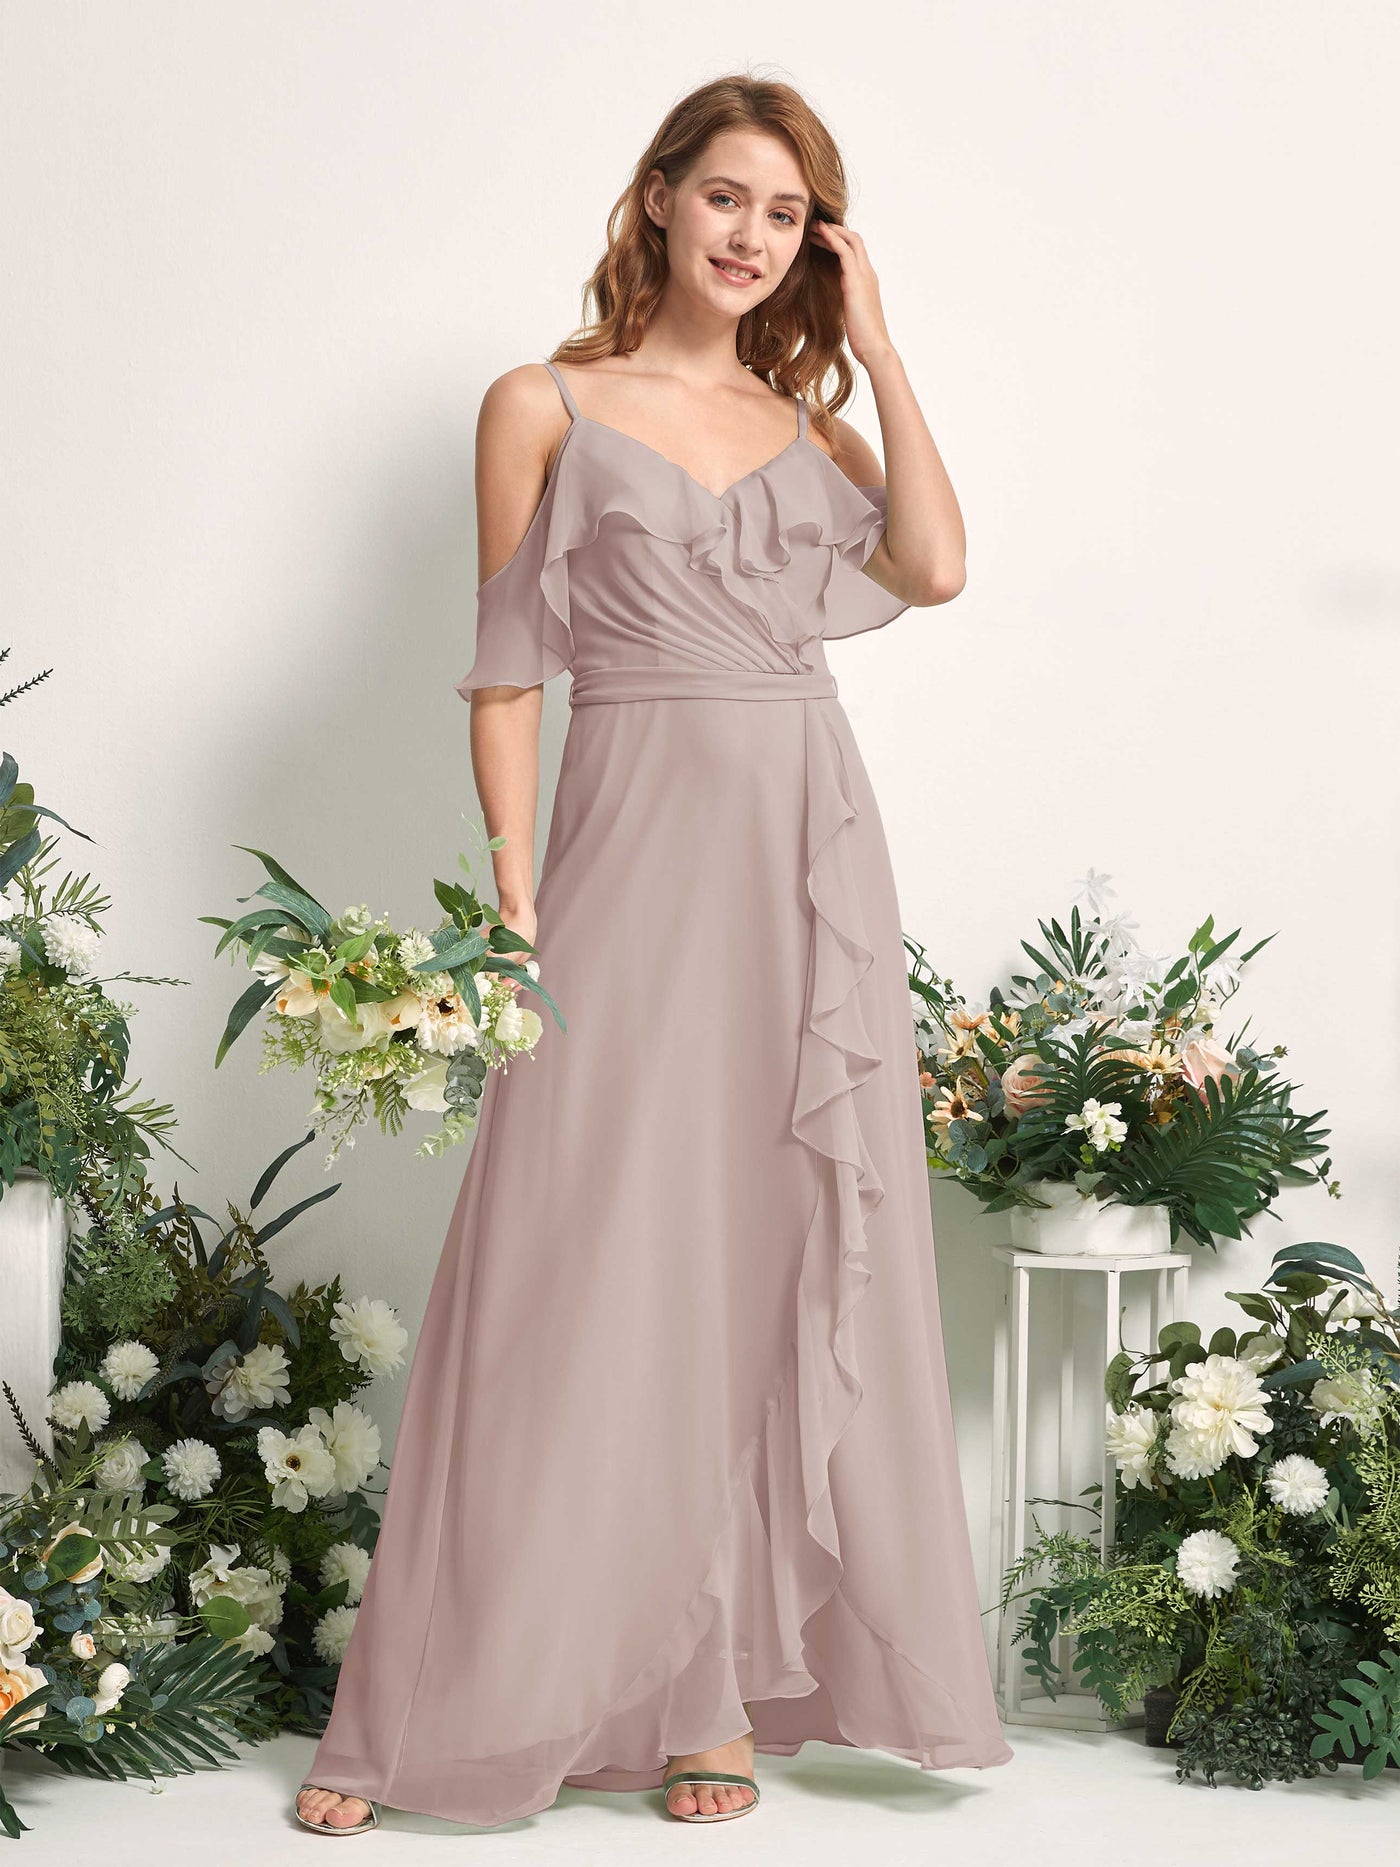 Bridesmaid Dress A-line Chiffon Spaghetti-straps Full Length Sleeveless Wedding Party Dress - Taupe (81227424)#color_taupe